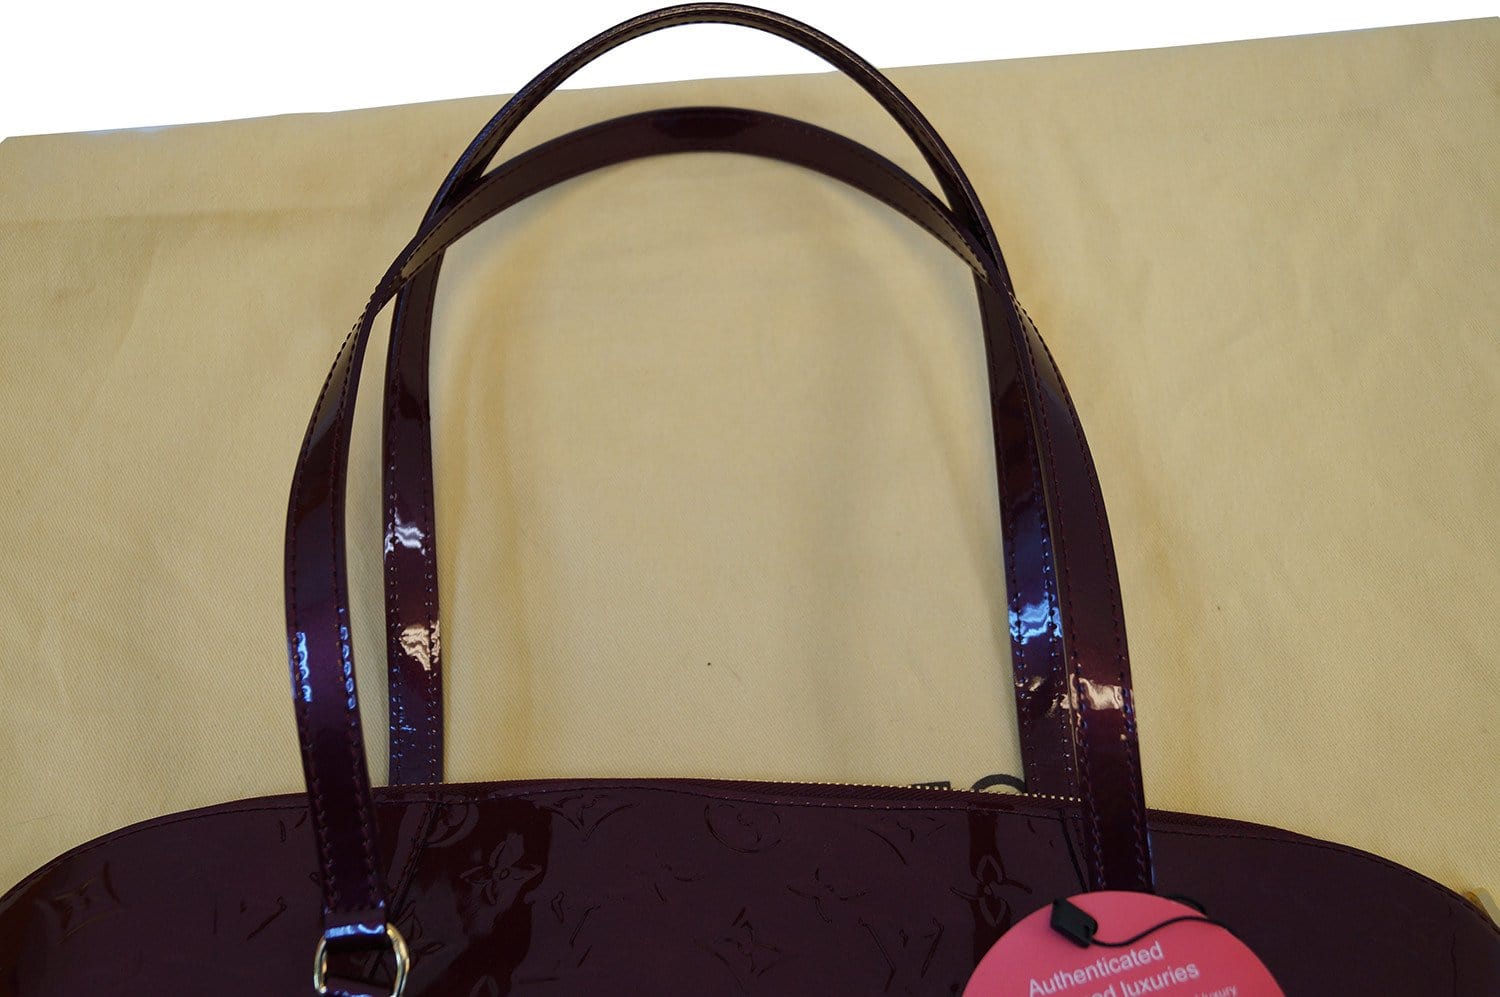 Louis Vuitton - Authenticated Avalon Handbag - Patent Leather Brown for Women, Very Good Condition